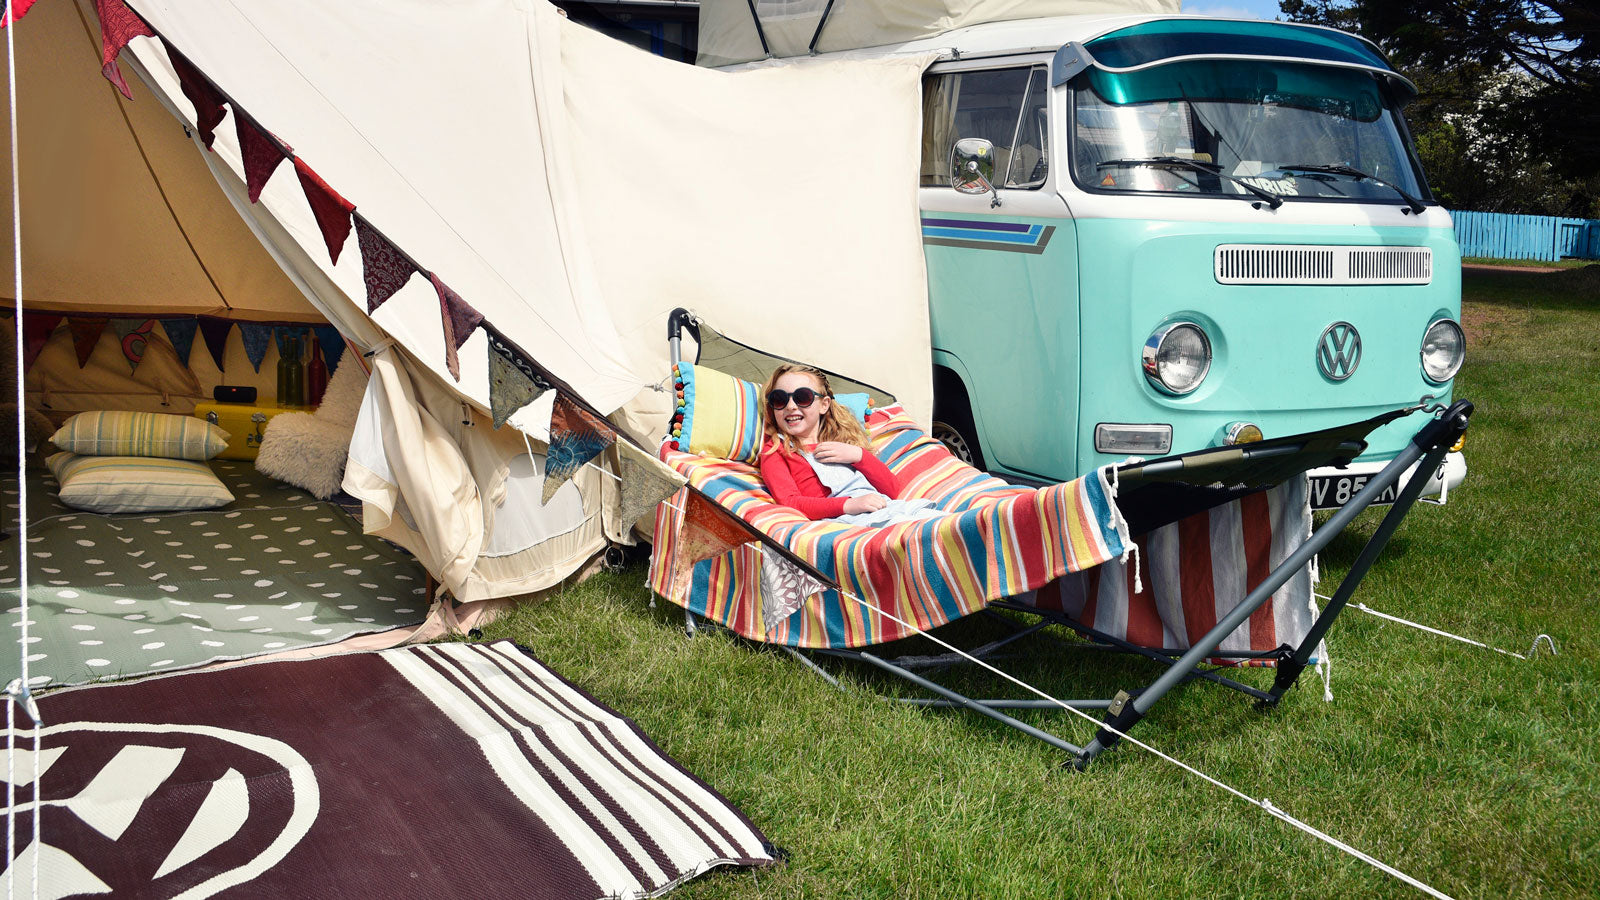 Driveaway Awning Guide Part 3: How to Fit an Awning to Your Campervan